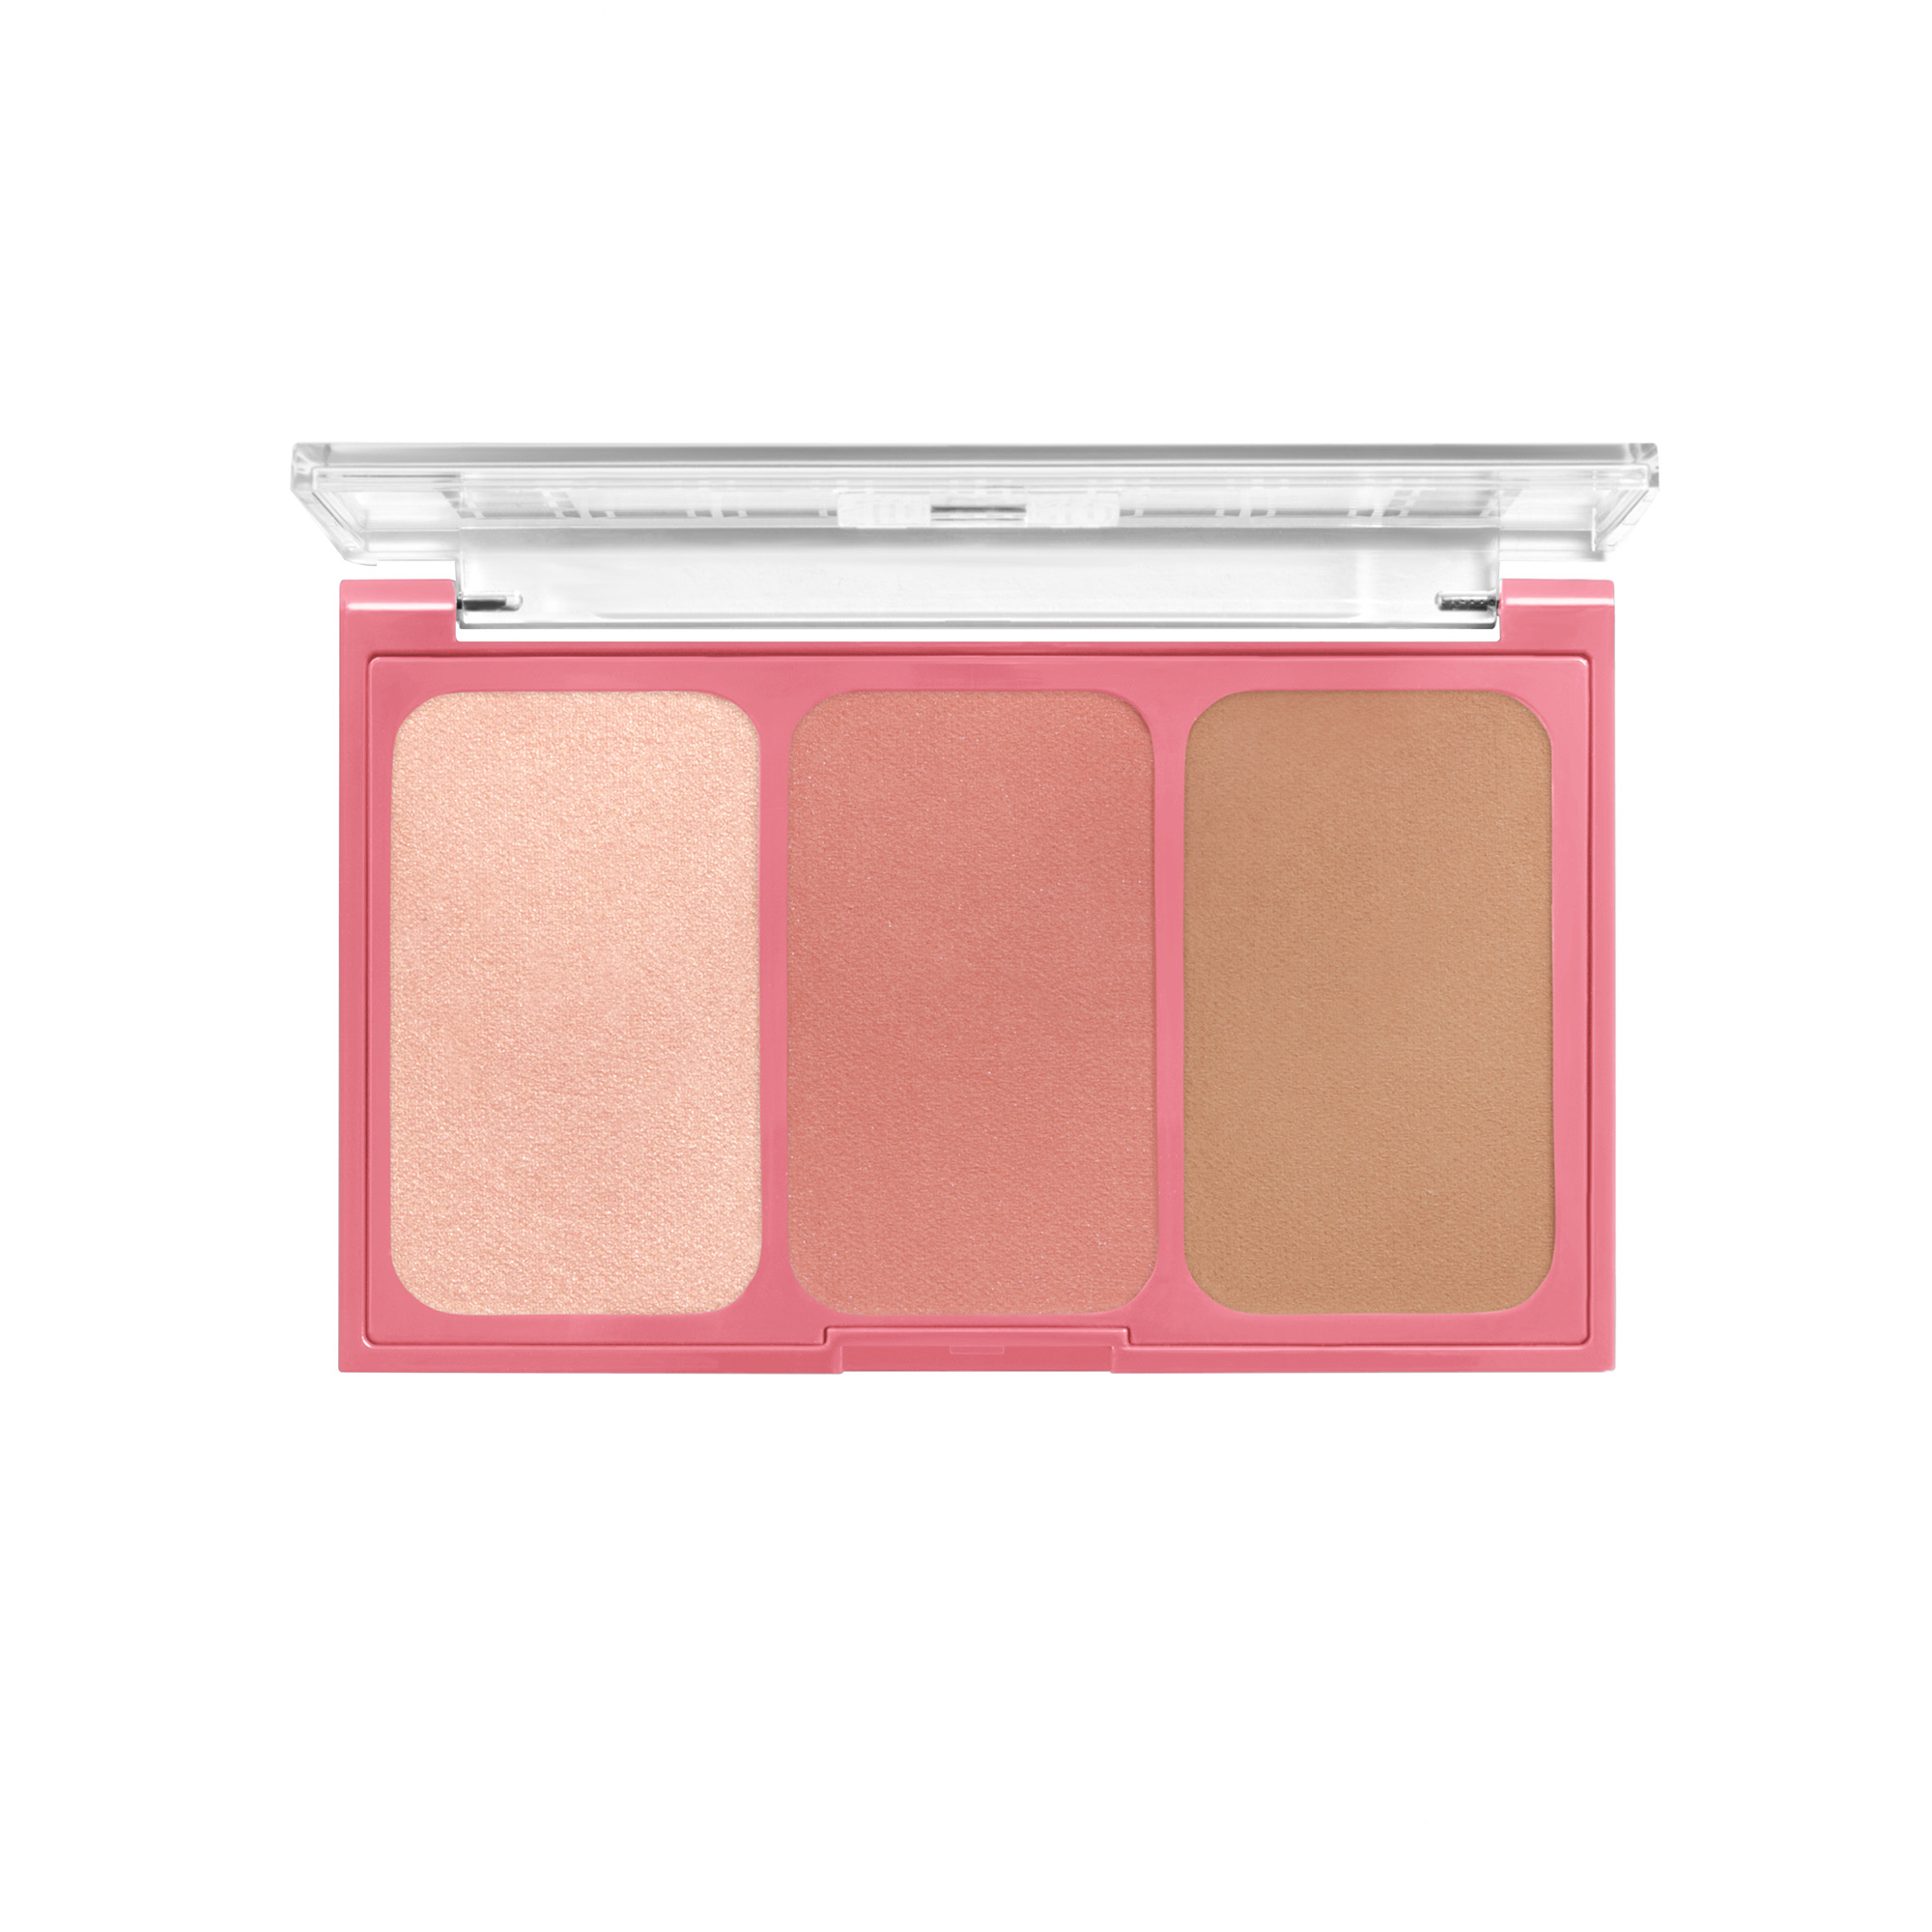 COVERGIRL Peach Scented Collection, Peach Punch Highlighter Palette - image 4 of 4